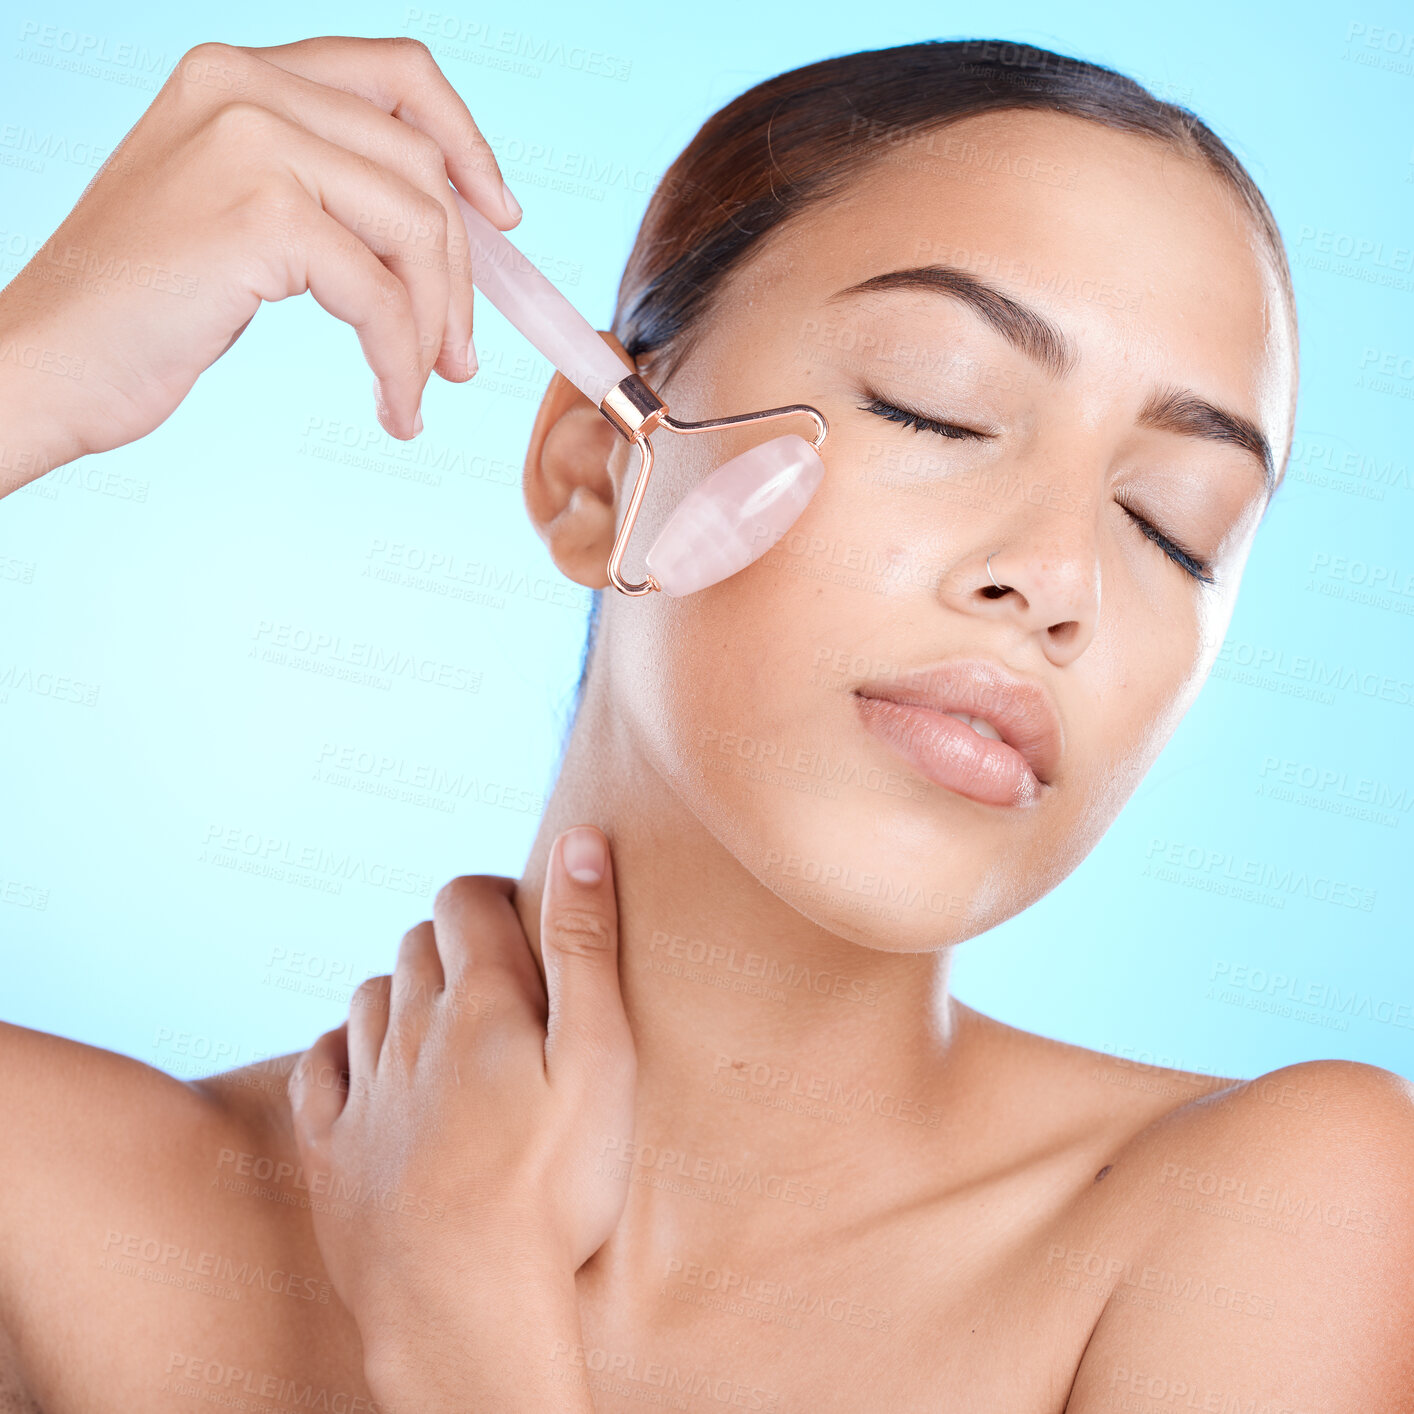 Buy stock photo Skincare, rose quartz and face massage in studio for beauty, anti aging and skin wellness on blue background. Facial, derma roller and girl model relax with luxury, skin and product while isolated 